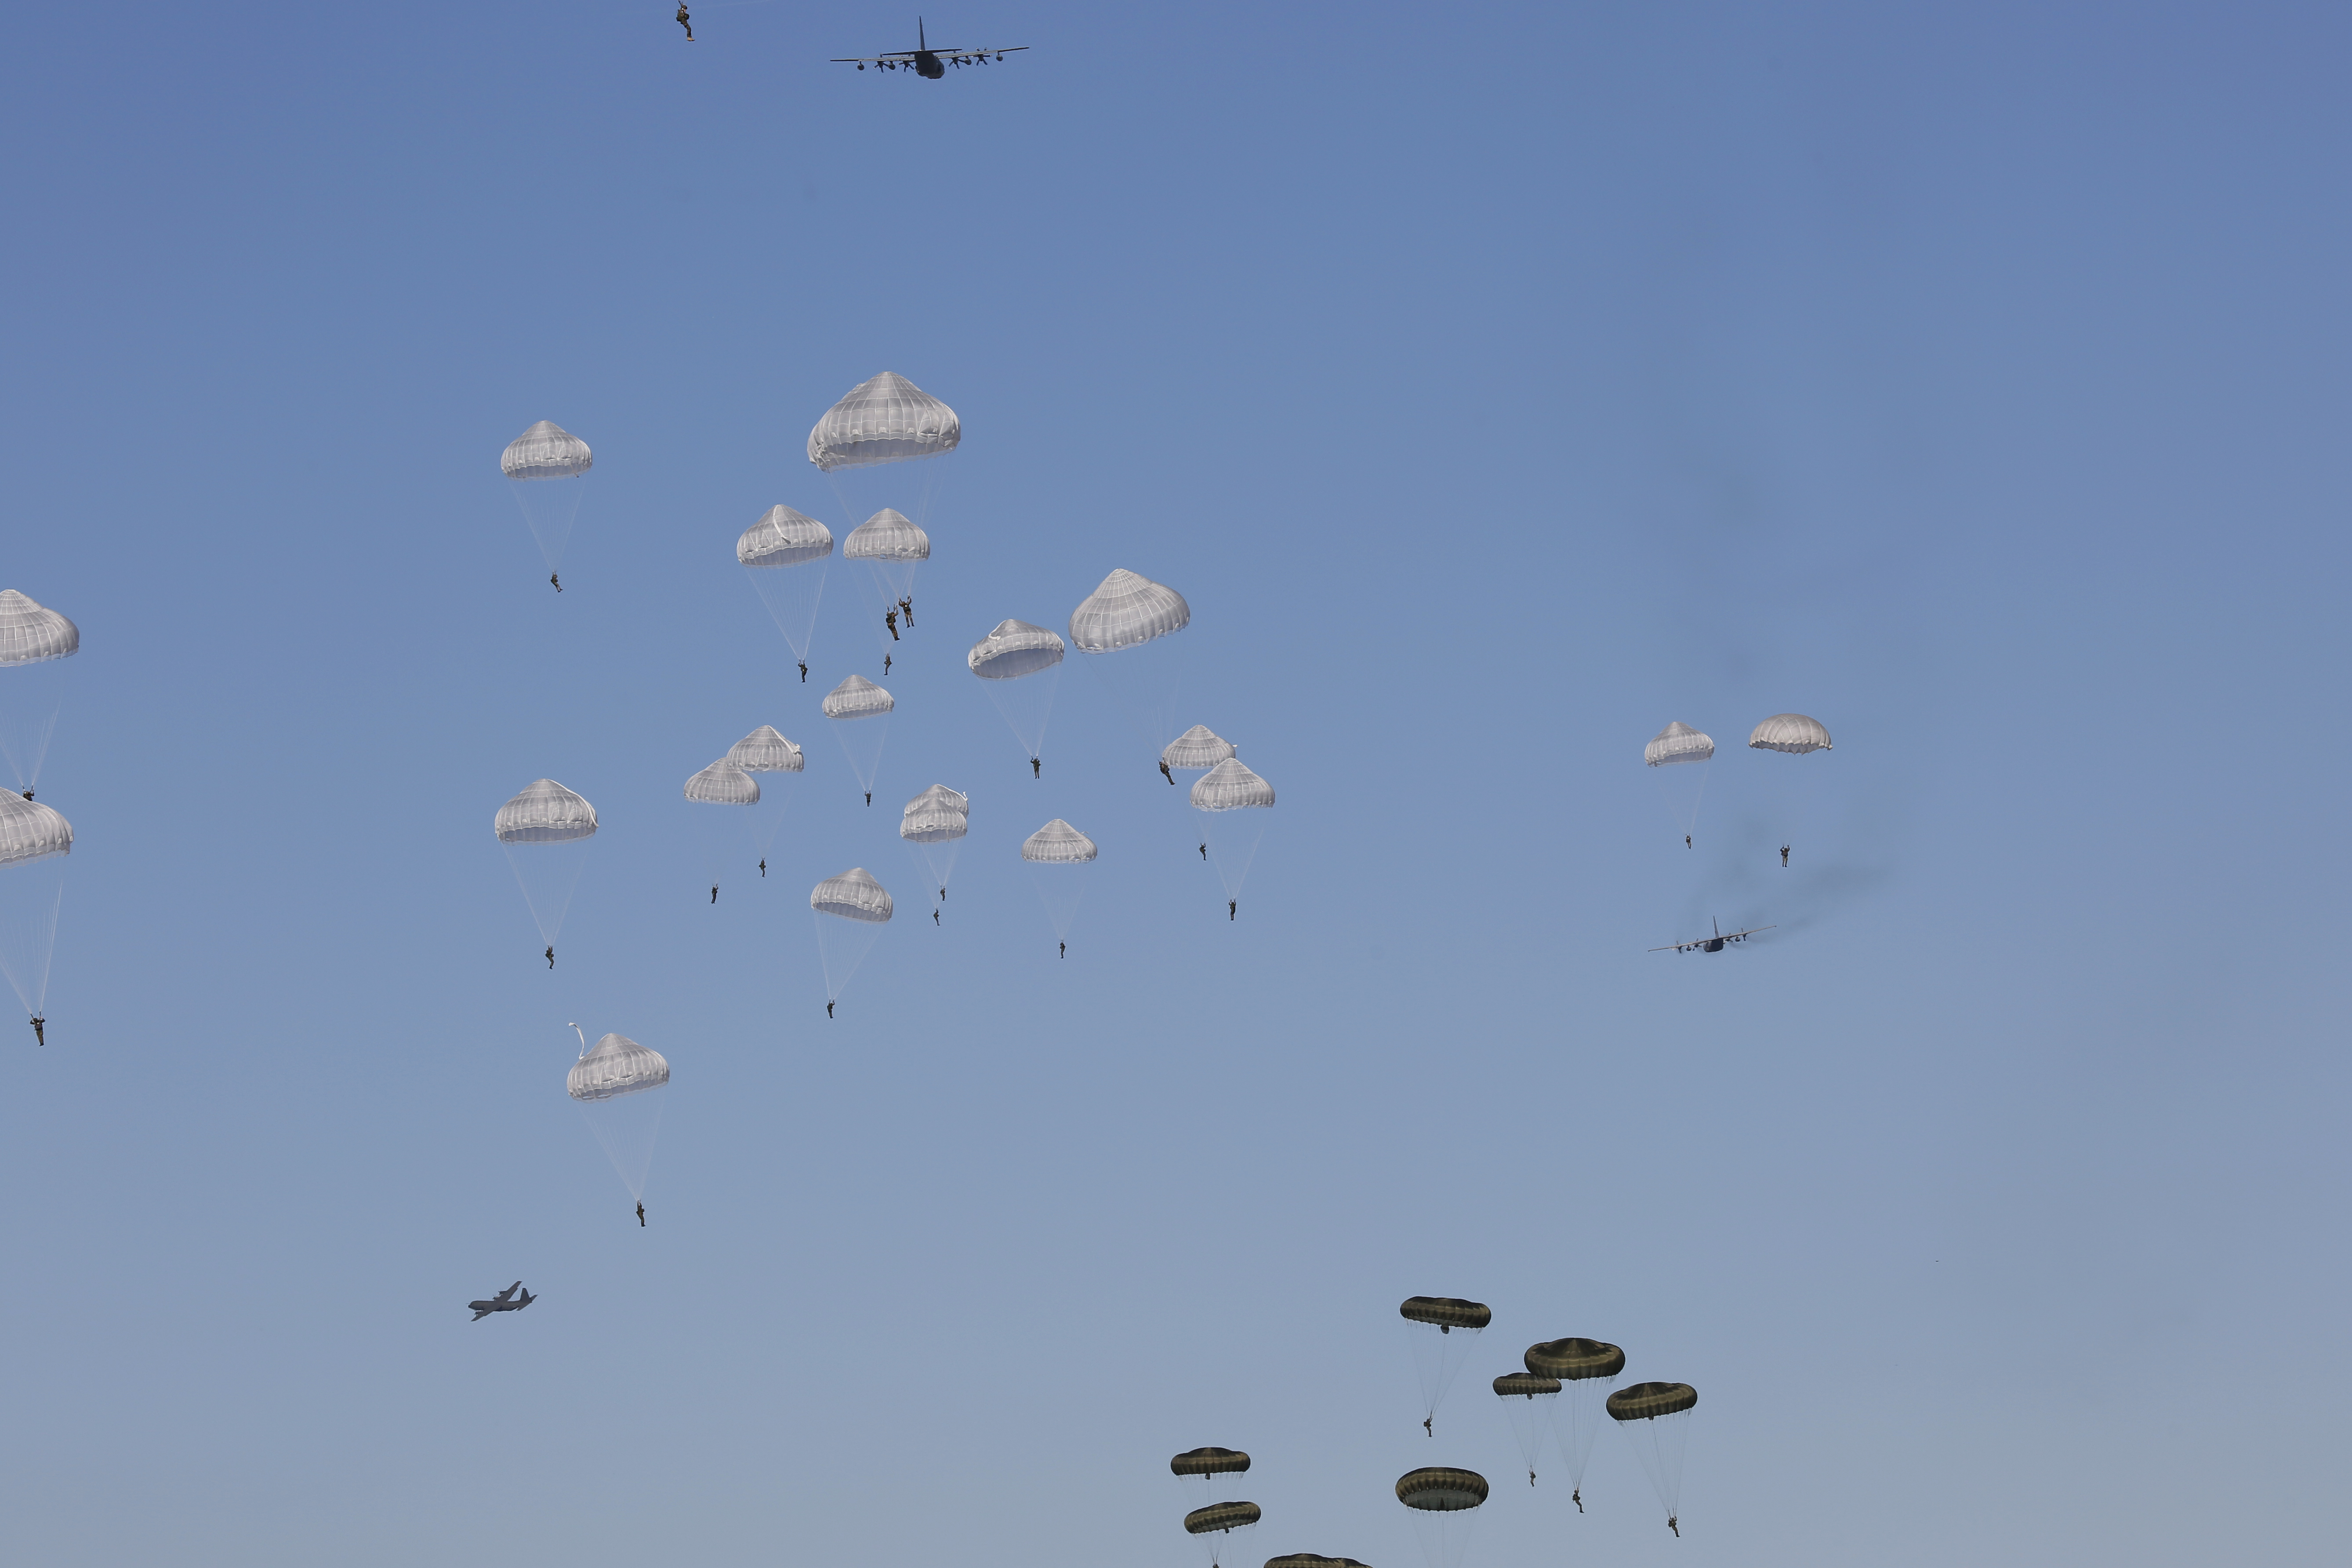 View the photo gallery of the largest airborne exercise and learn how EATC supports Falcon Leap 2019!